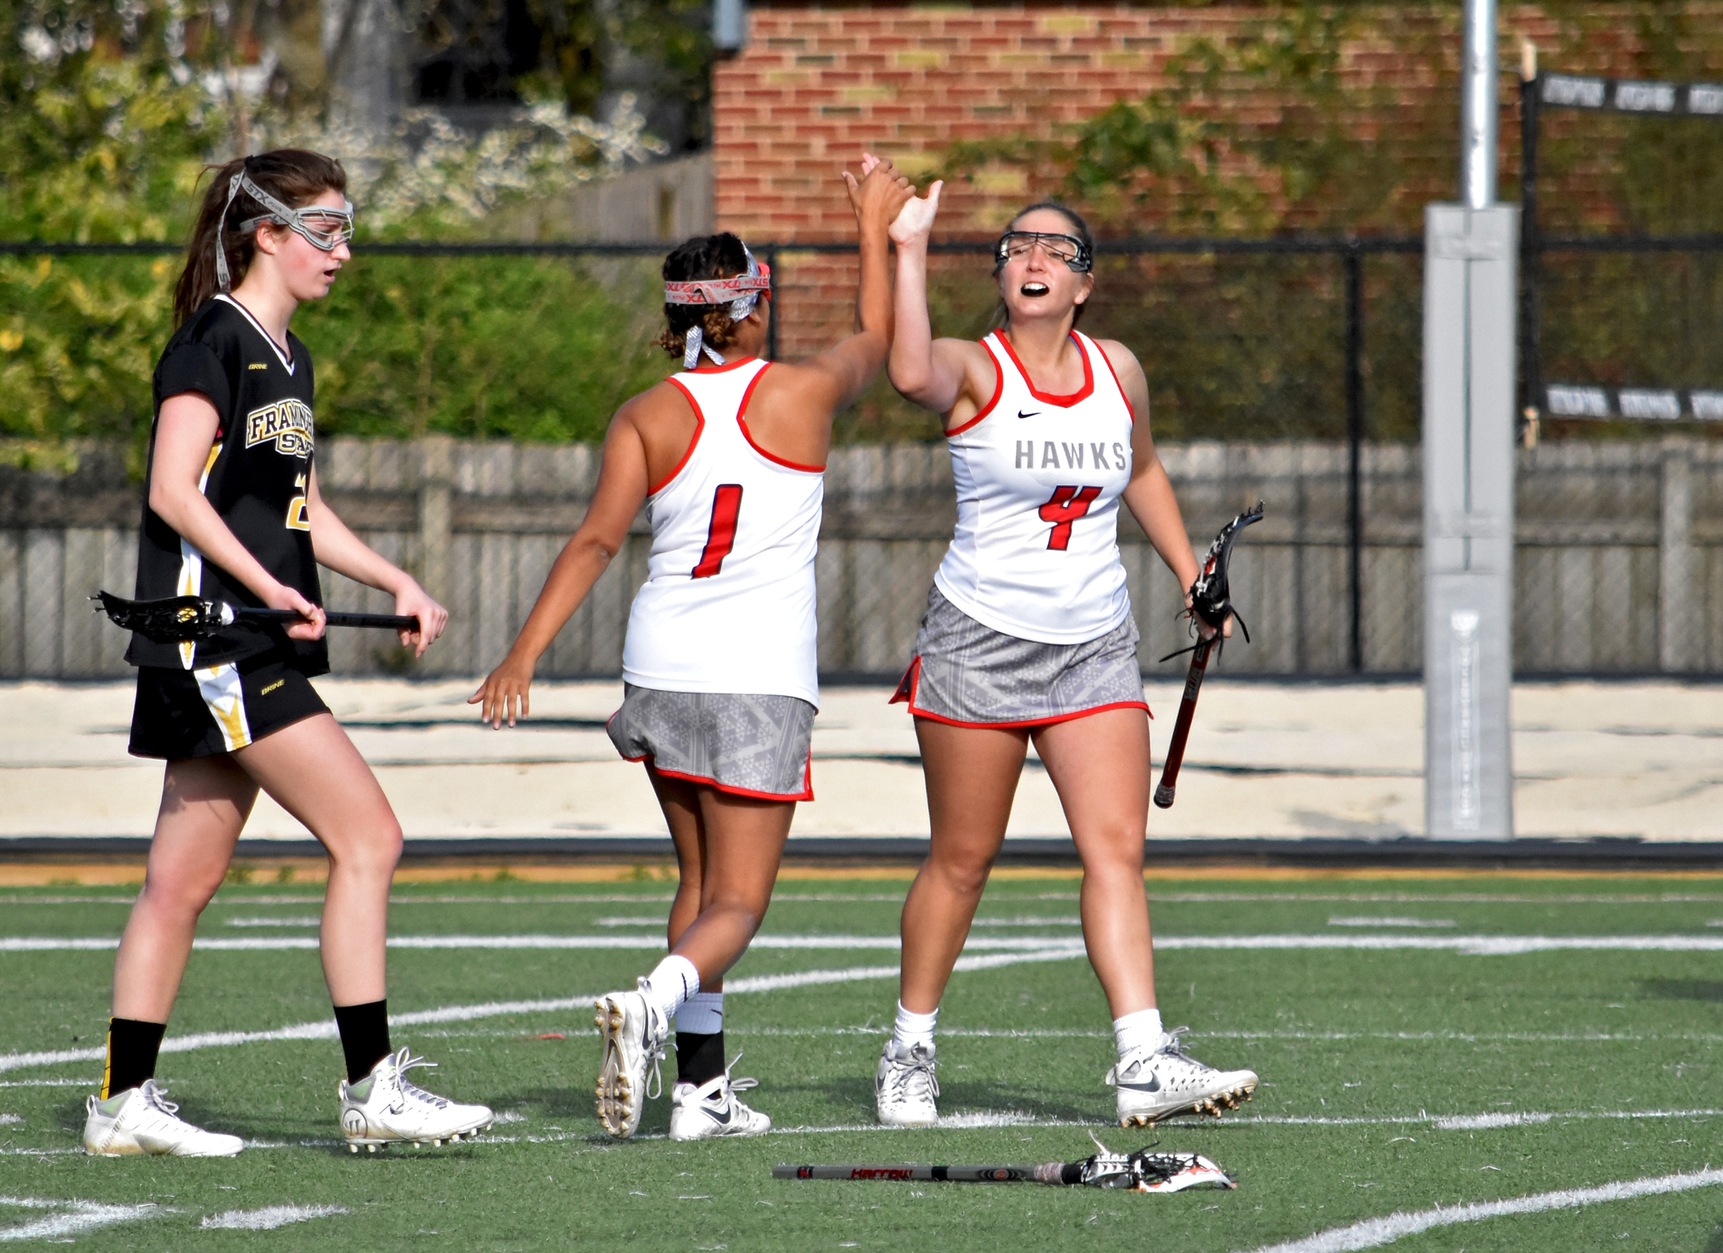 Huntingdon's Jade Paul (#1) is congratulated by Carolyn Smith (#4) after Paul's second goal in Thursday's loss to Framingham State. (Photo by Wesley Lyle)